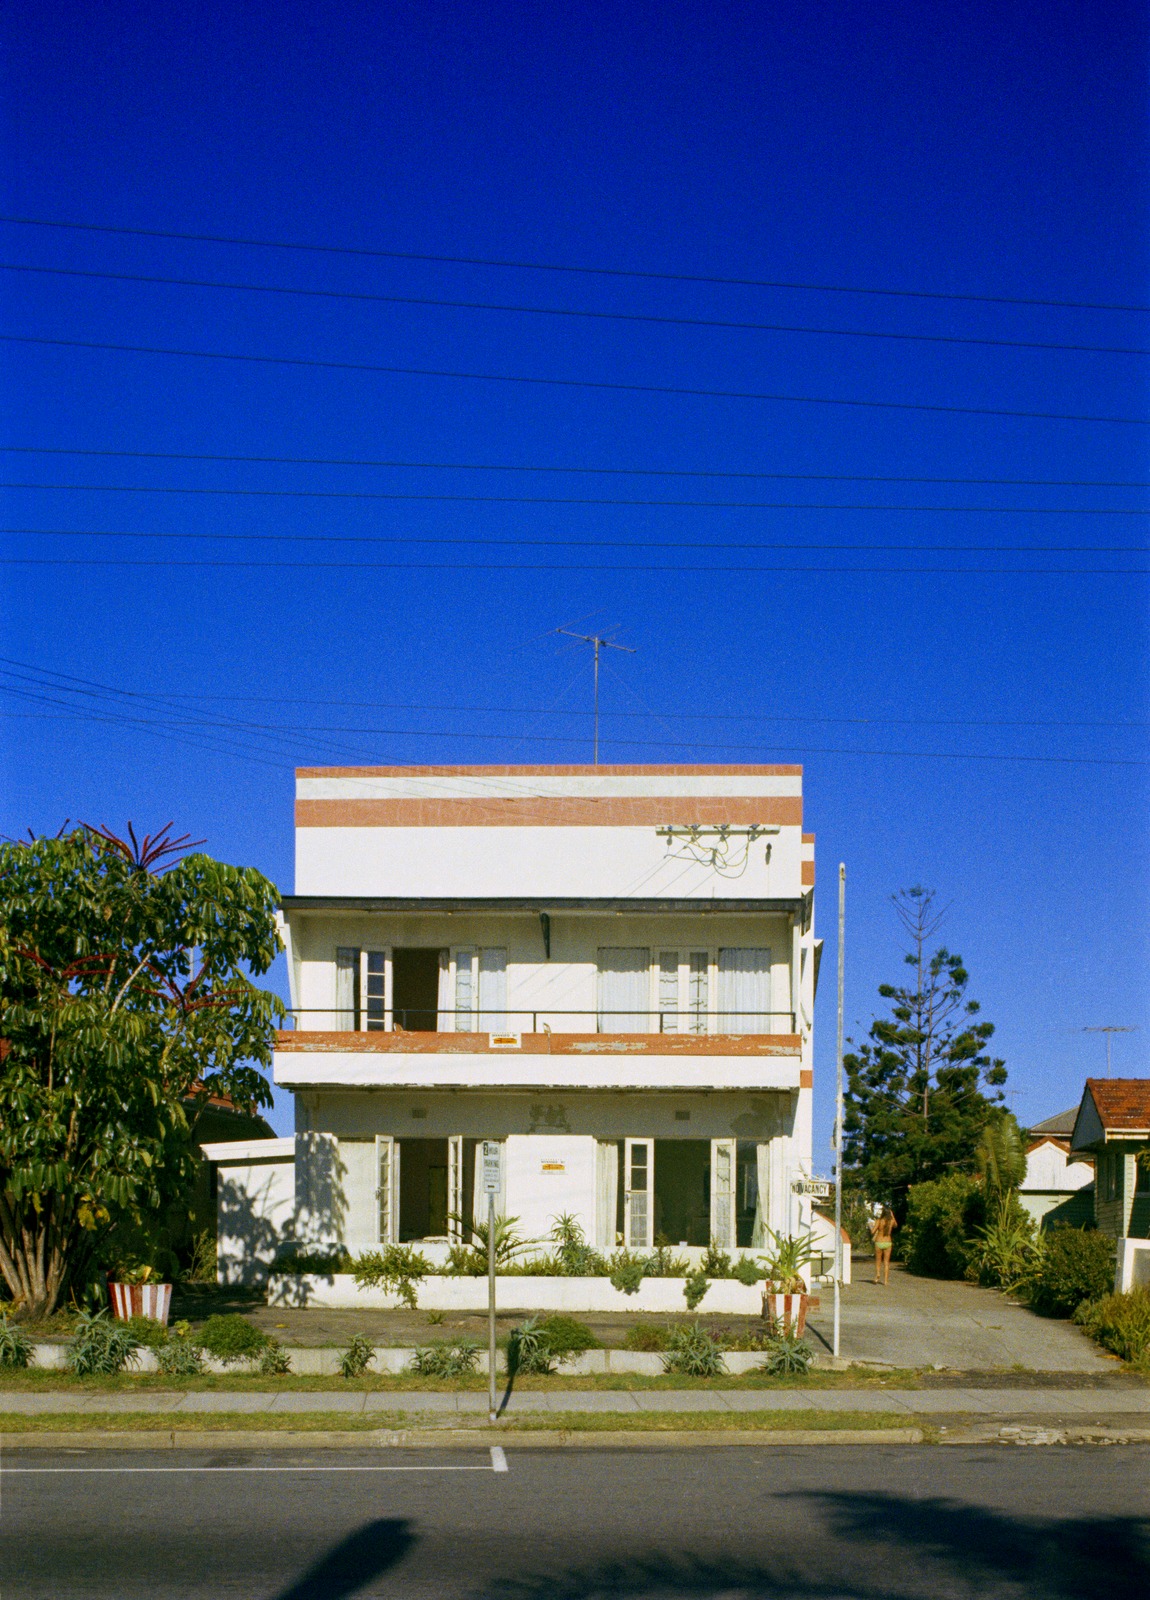 Photograph by John Gollings of a guesthouse at Surfers Paradise, 1973.